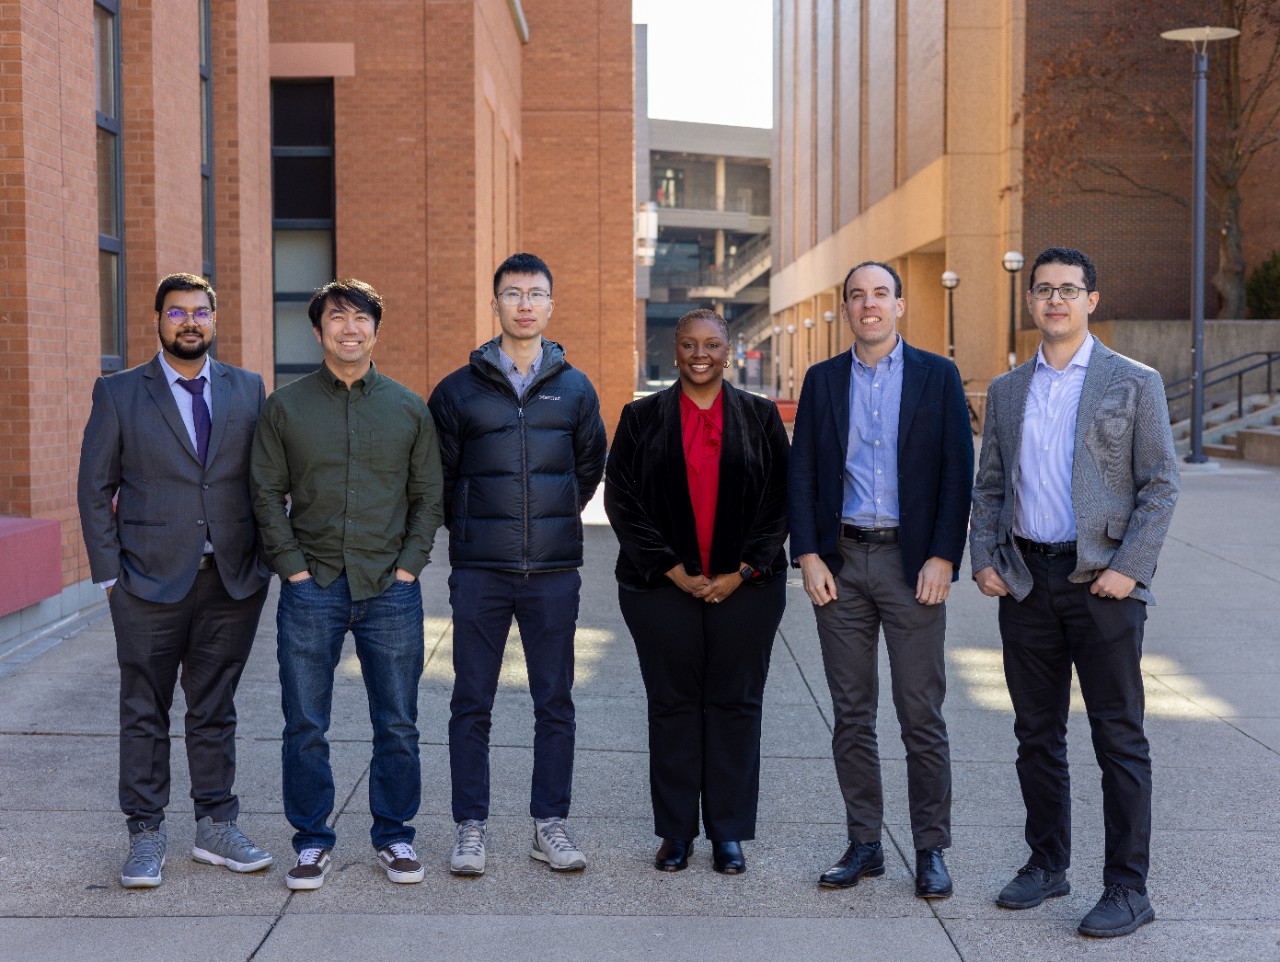 Group photo of new CEAS faculty (from left: Abhinav SInha, Chaowen Guan, Tianren Wu, LaShan Hendrix, Andrew Erwin and Ahmed Allam)